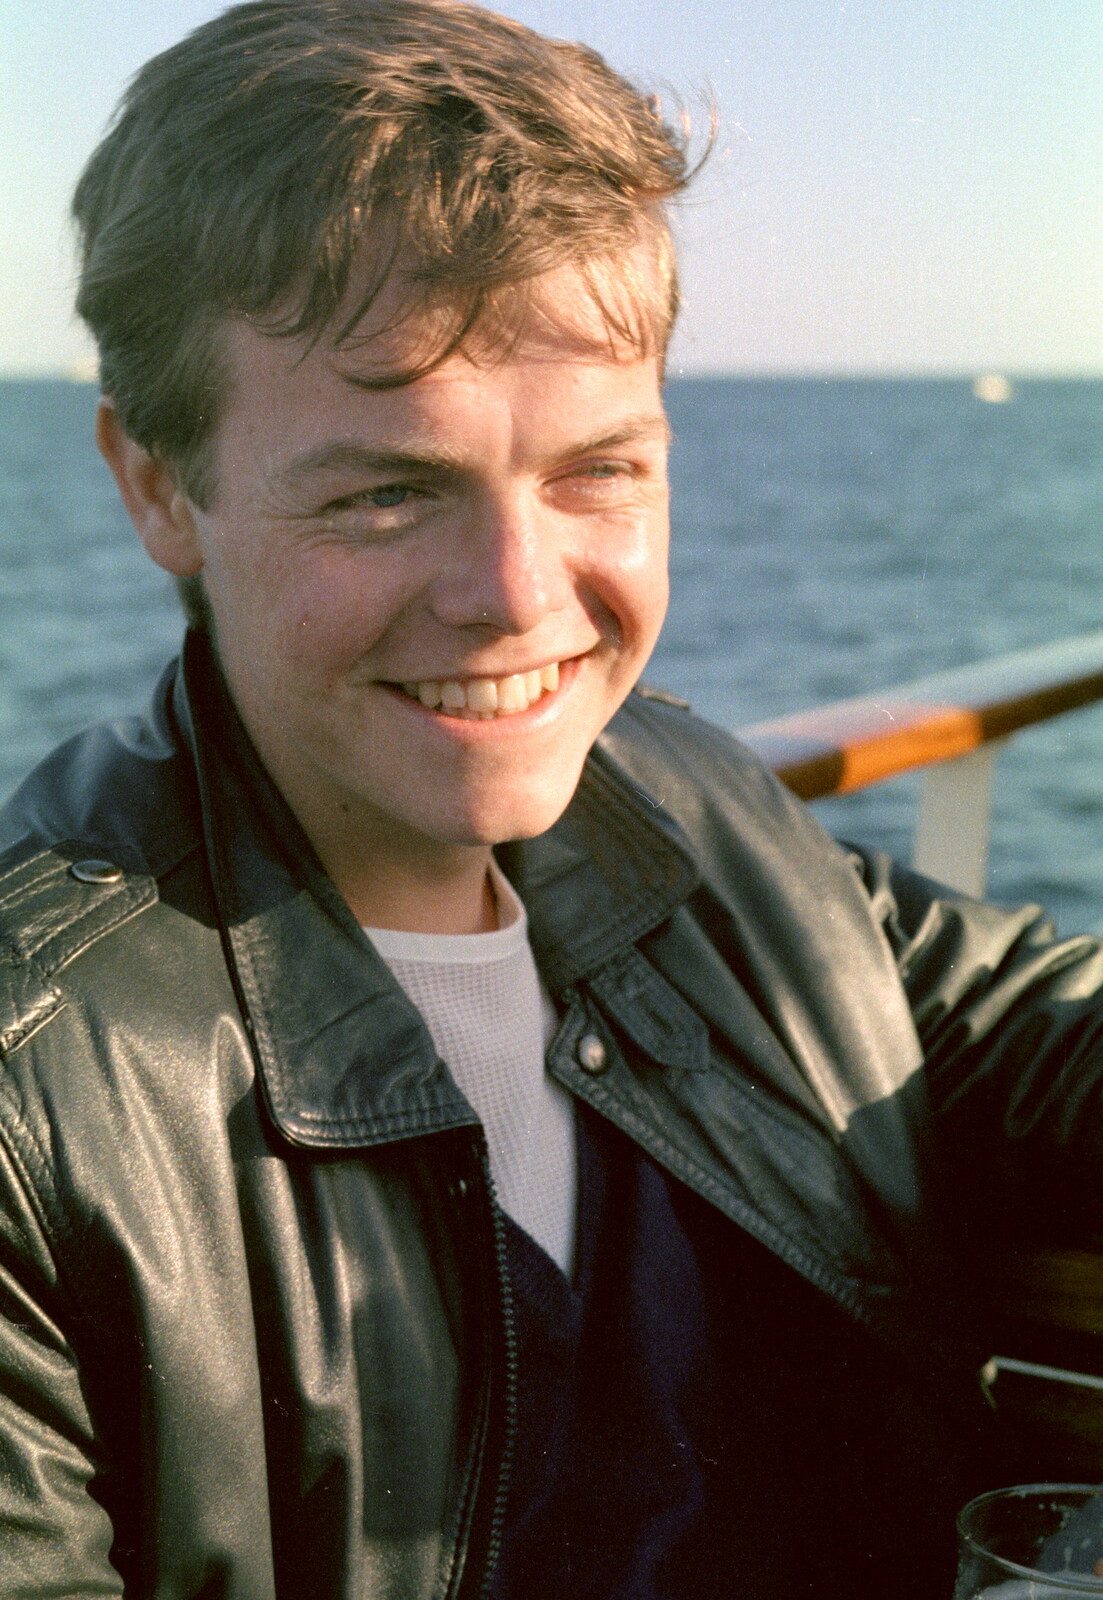 Dave Lock from Uni: A Student Booze Cruise, Plymouth Sound, Devon - 2nd May 1986